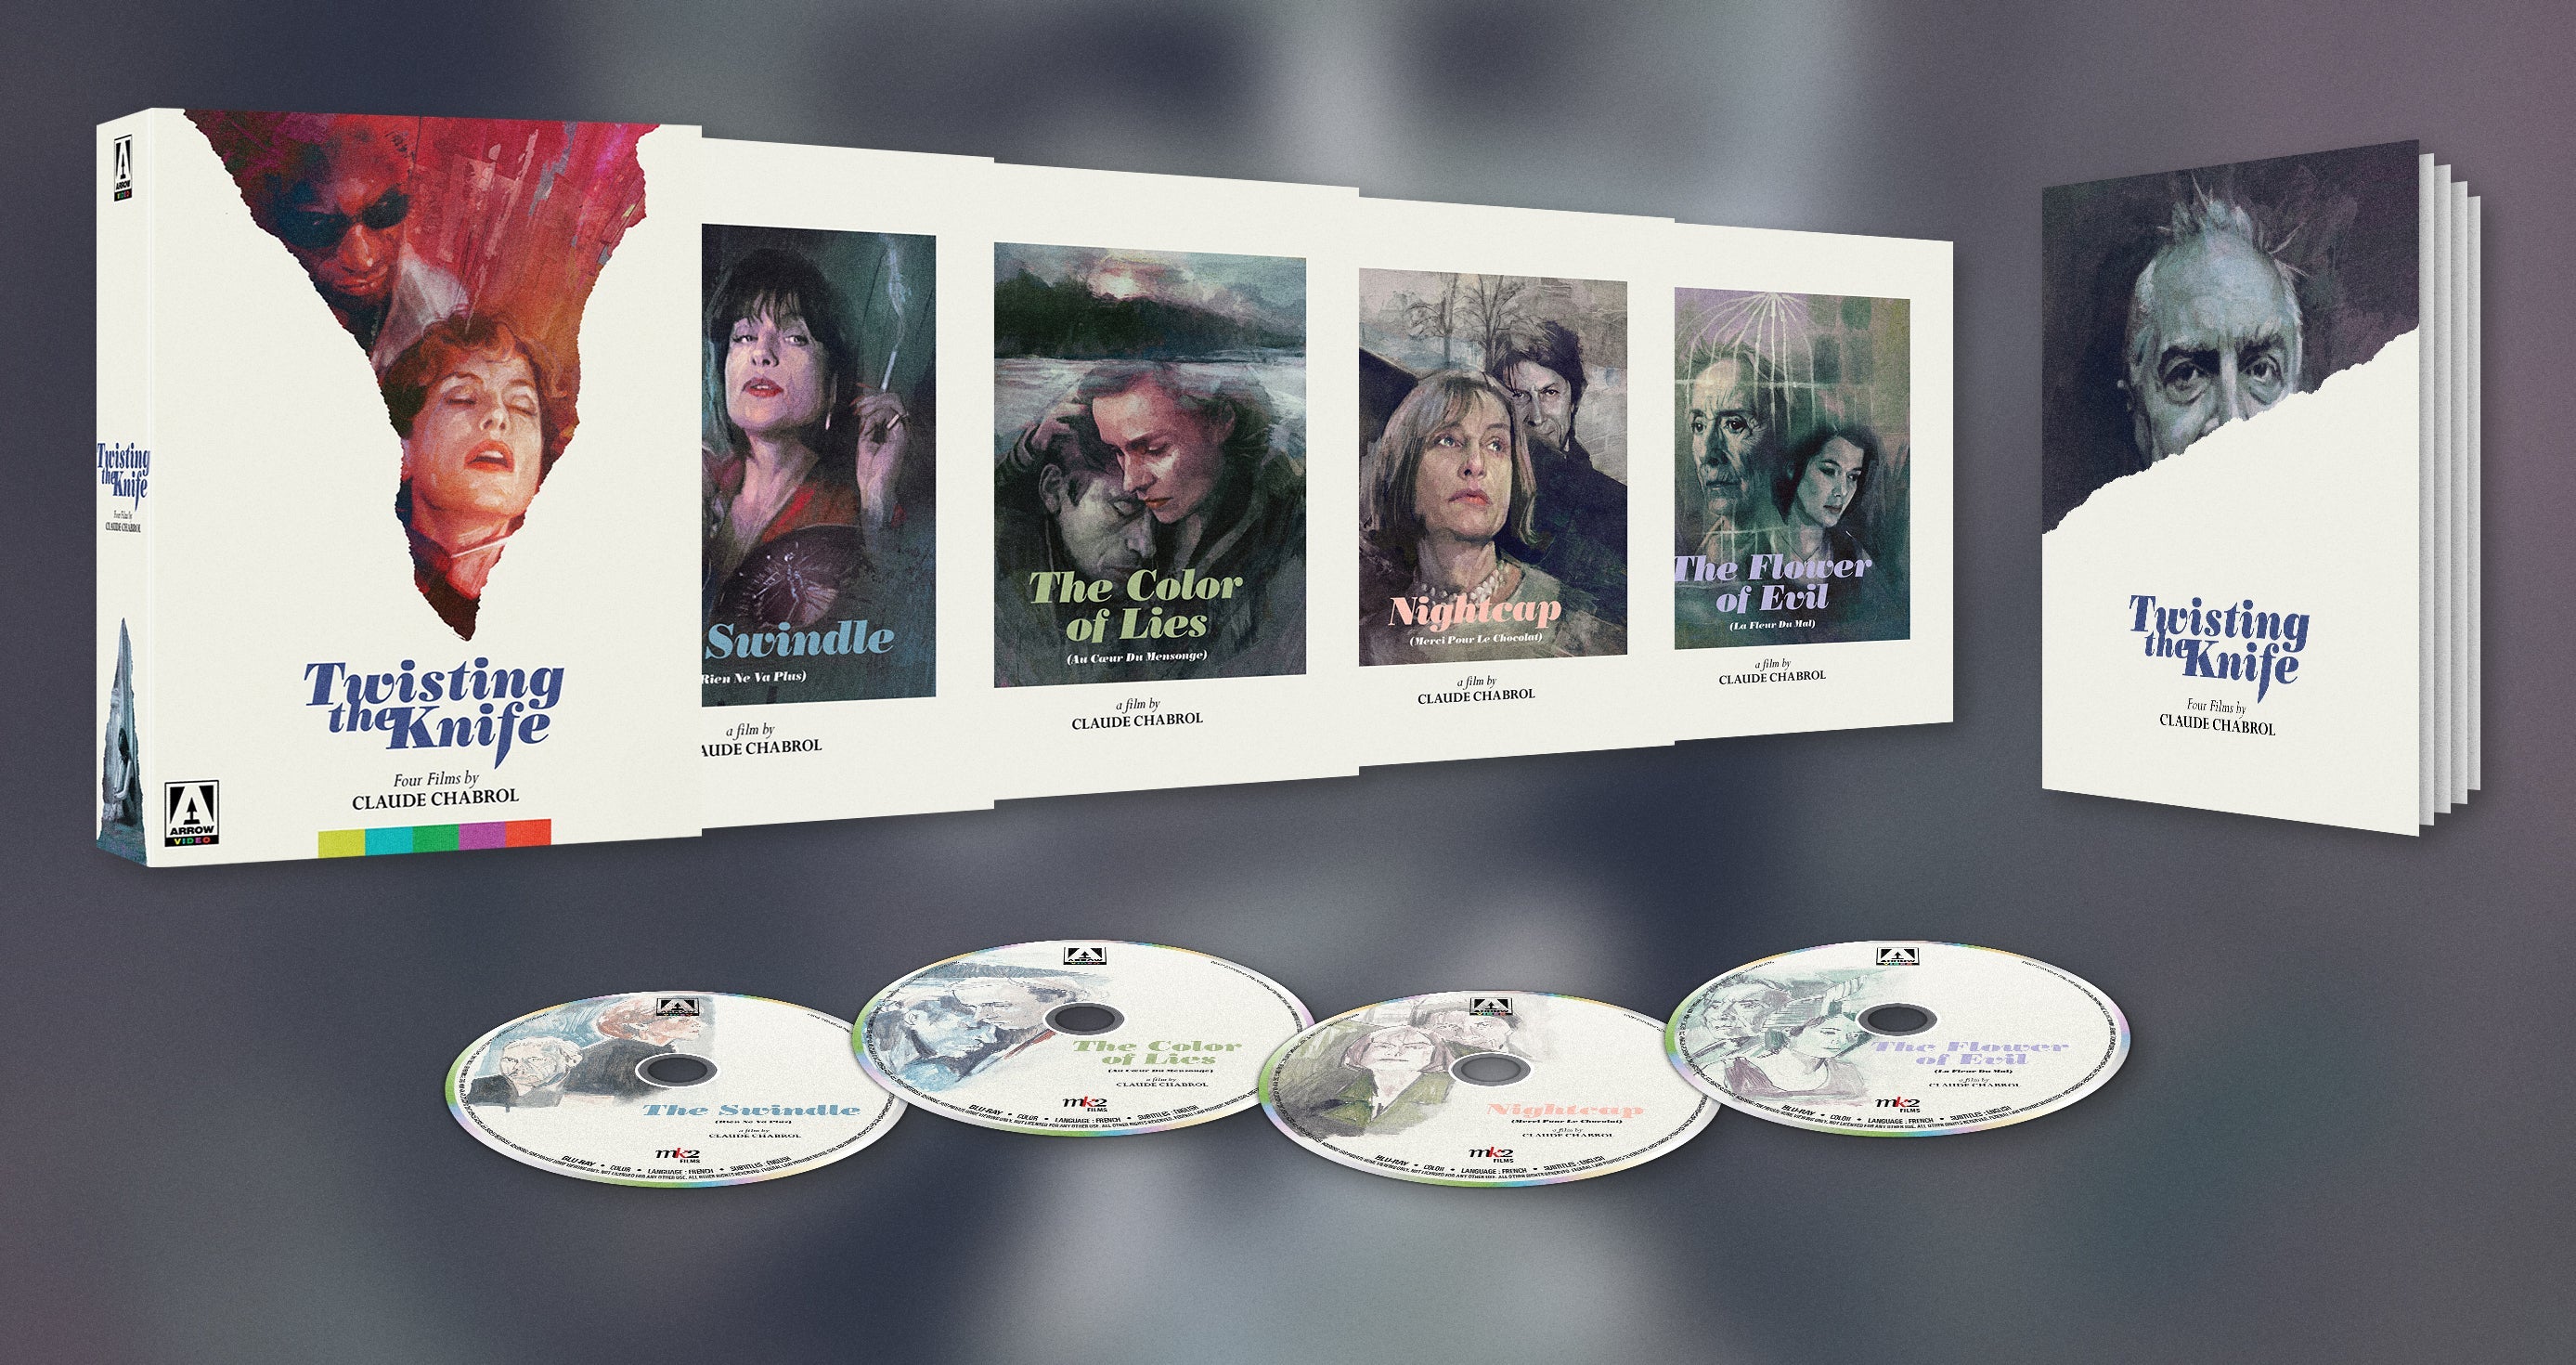 Twisting The Knife: Four Films By Claude Chabrol (Limited Edition) Blu-Ray [Pre-Order] Blu-Ray